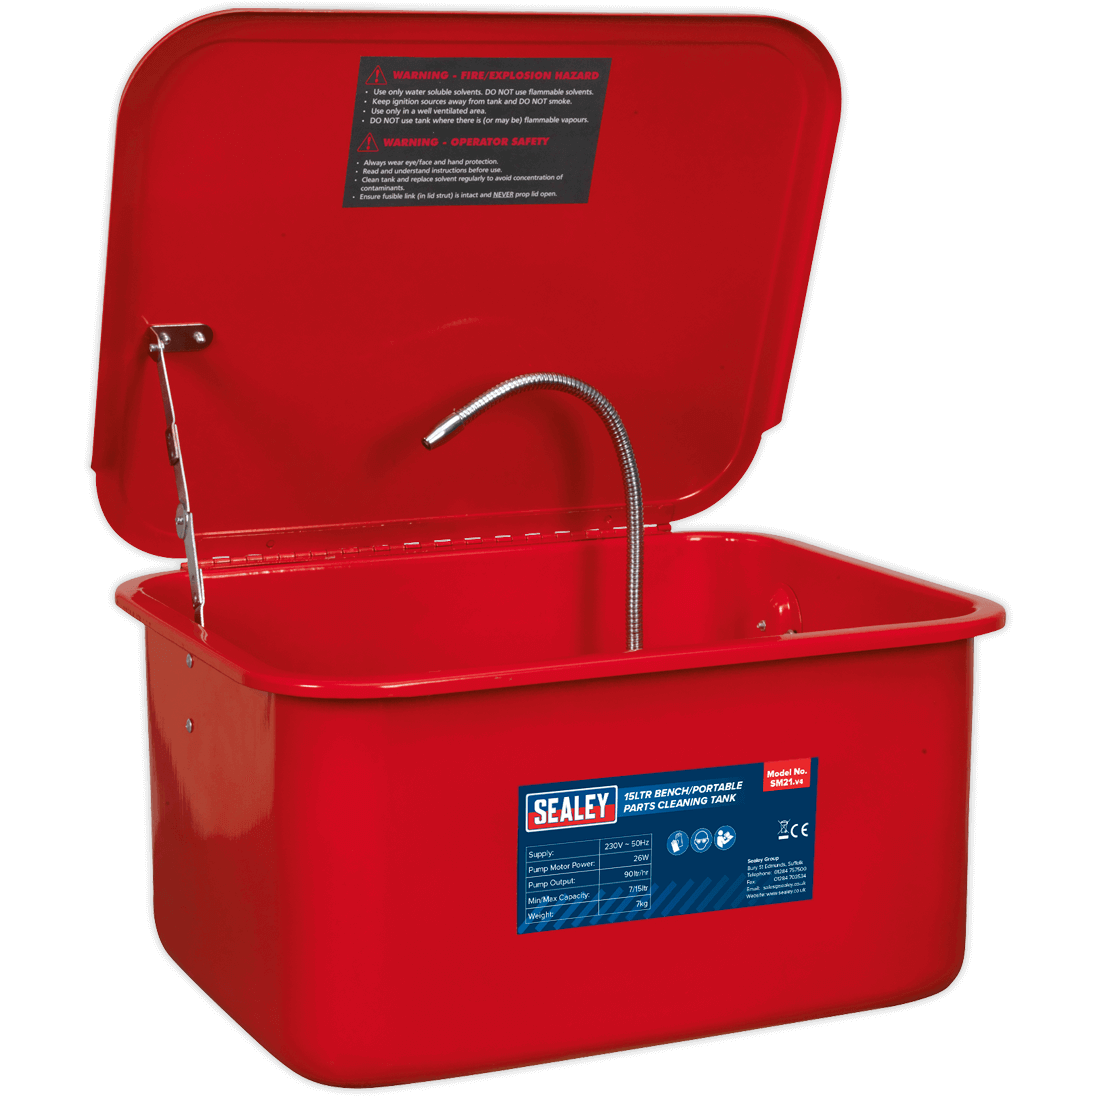 Sealey SM21 Portable Parts Cleaning Tank 240v